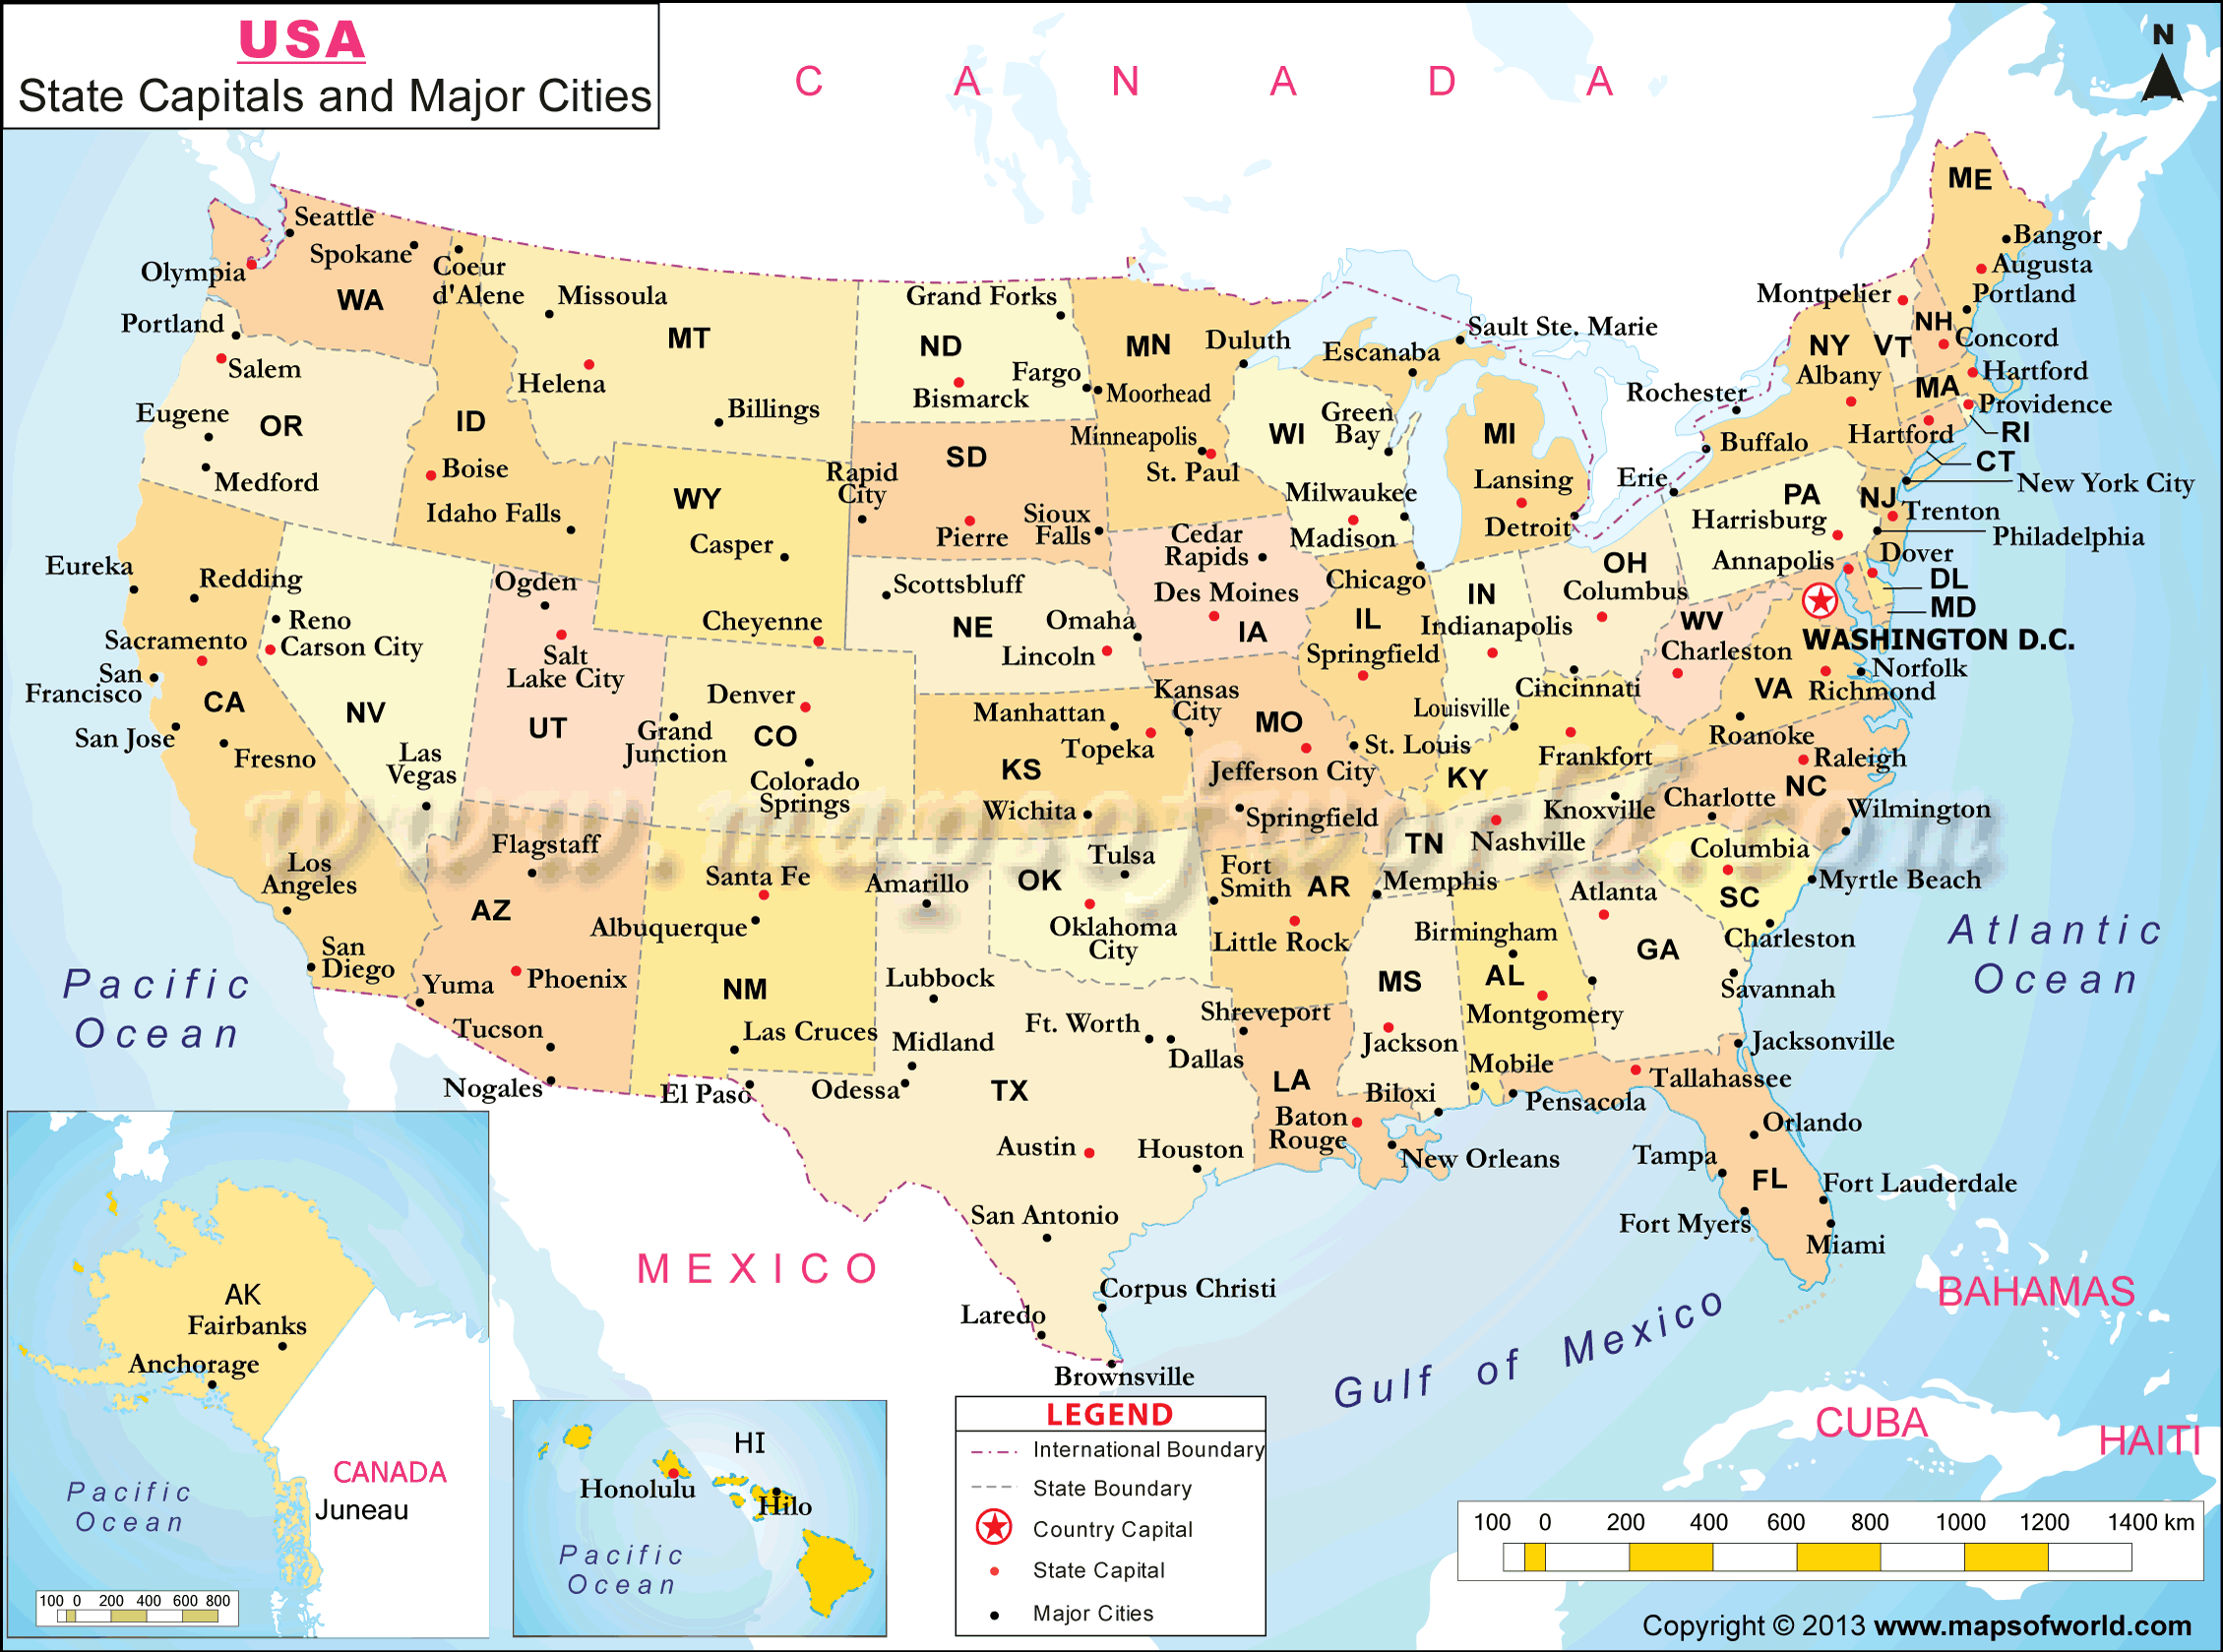 Major Cities in US. US Map of State Capitals and Major Cities